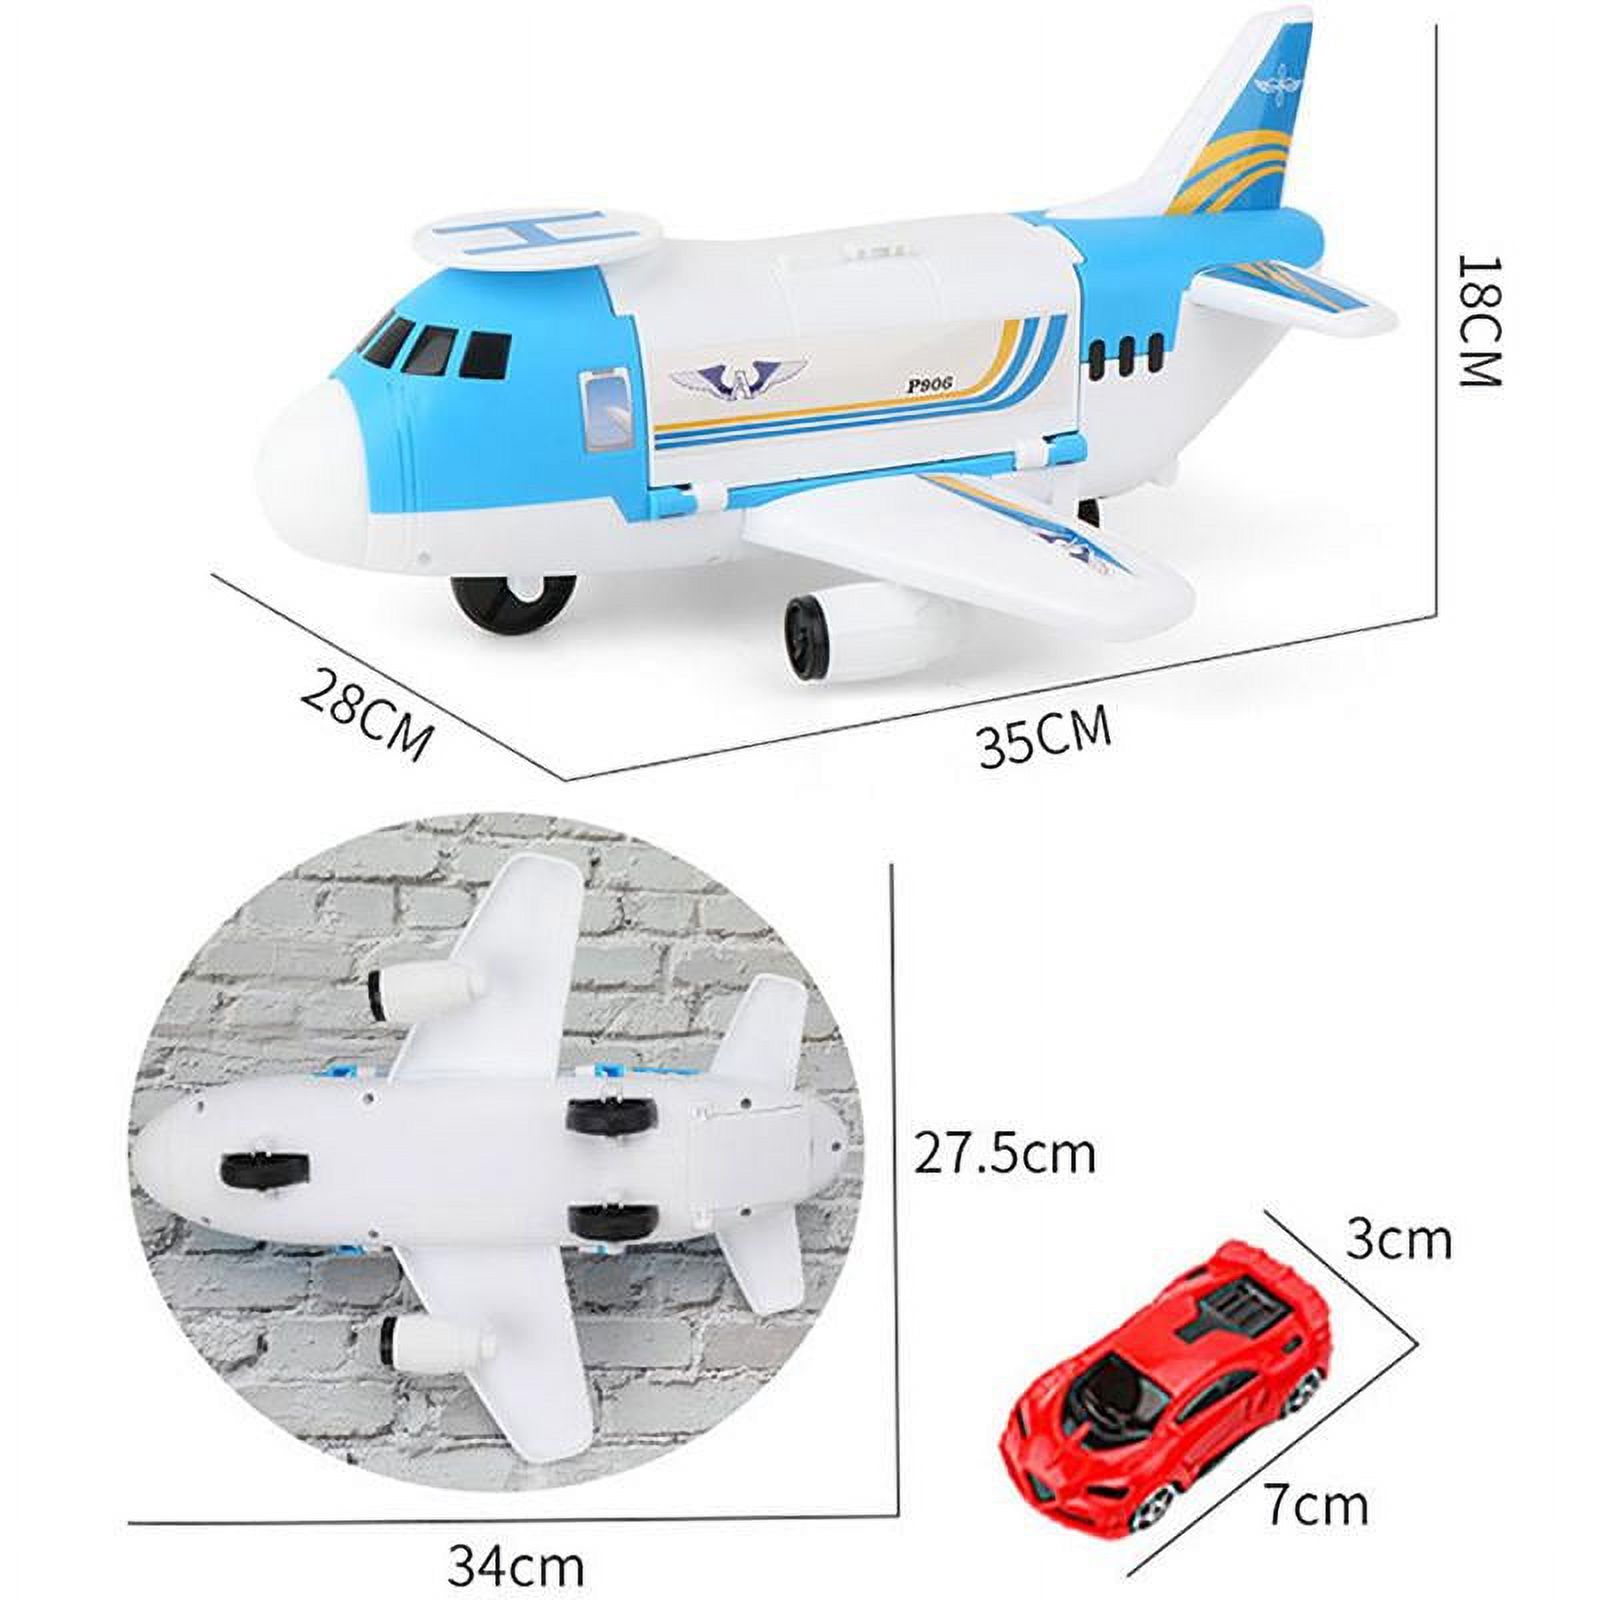 Luxsea Children's Airplane Model Storage Transport Alloy Car Passenger Aircraft Model Combination Kids Gift Educational Puzzle Storage Toys - image 4 of 8